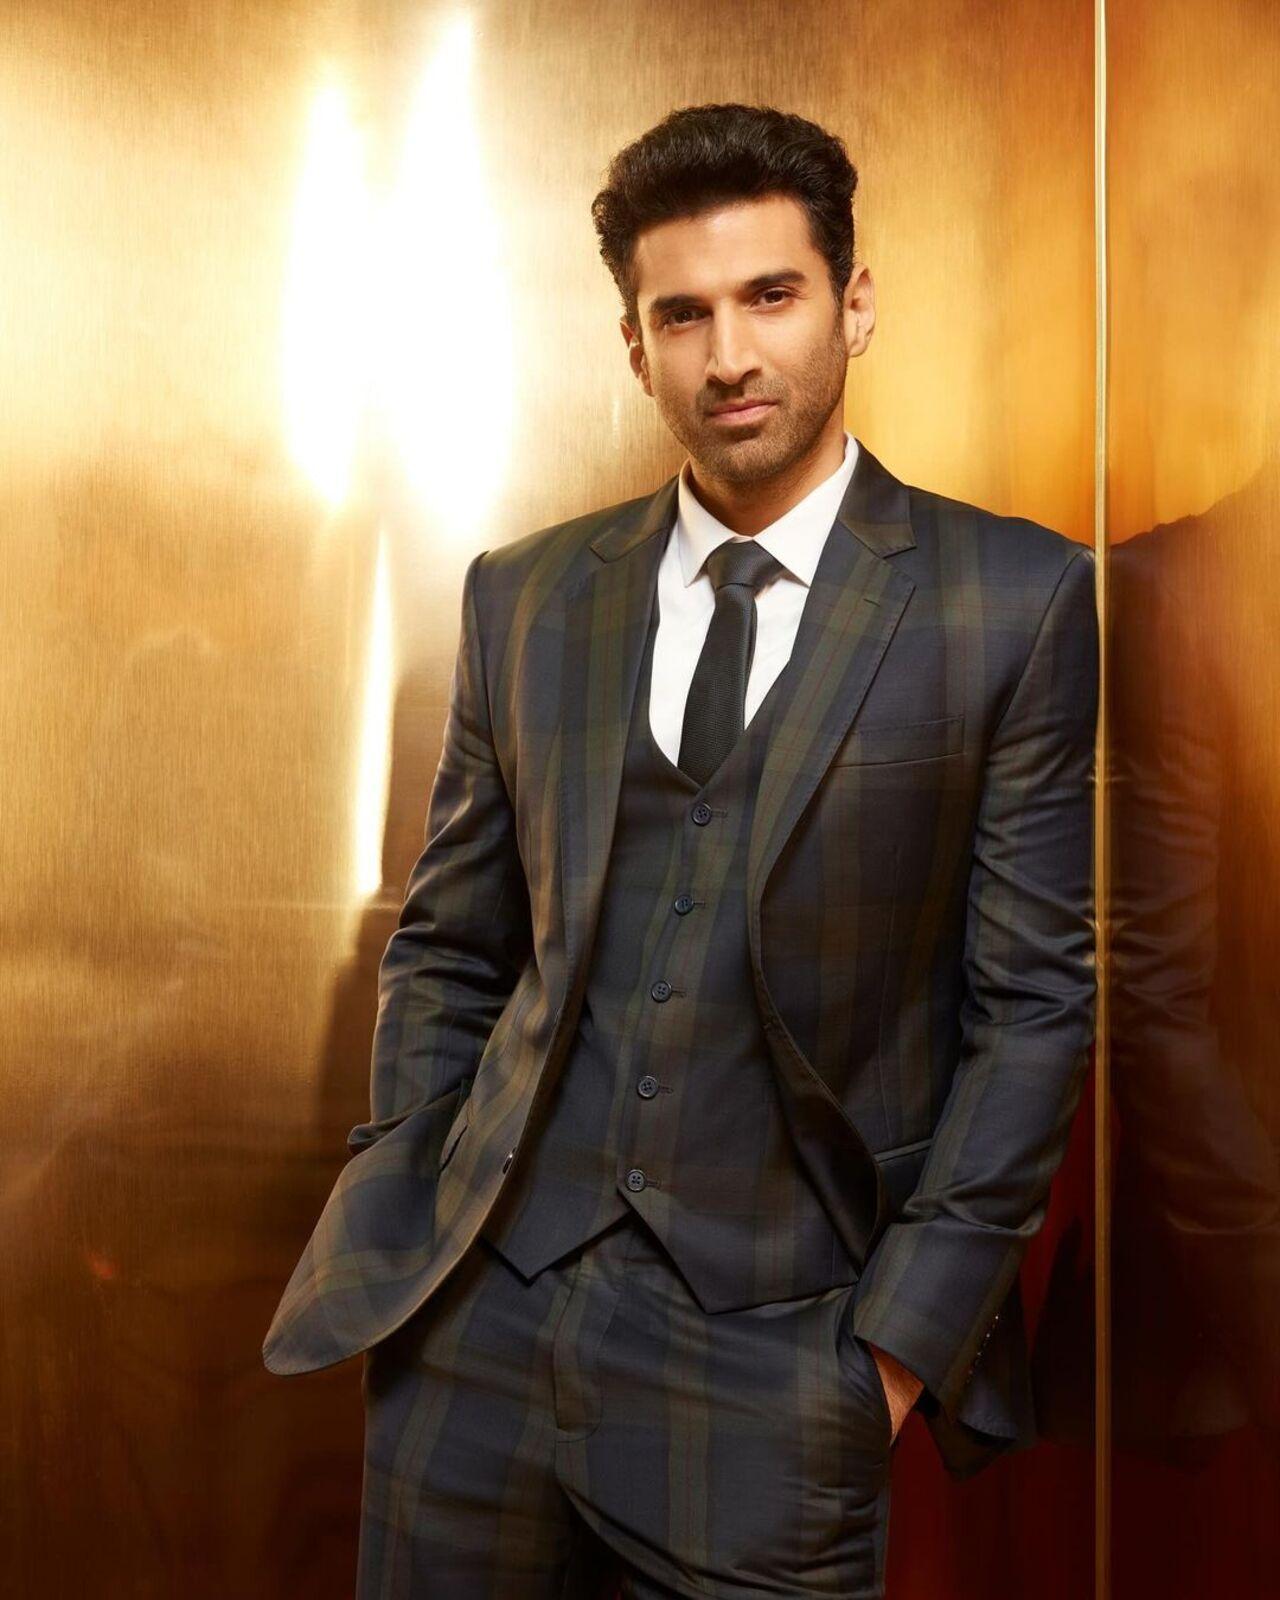 The latest episode of Koffee With Karan saw the 'bachelor boys' Aditya Roy Kapur and Arjun Kapoor grace the couch. Aditya had a great year with the success of hiss web series 'The Night Manager'. In the episode, his relatioship to his 'ignorance is bliss' attitude was talked about